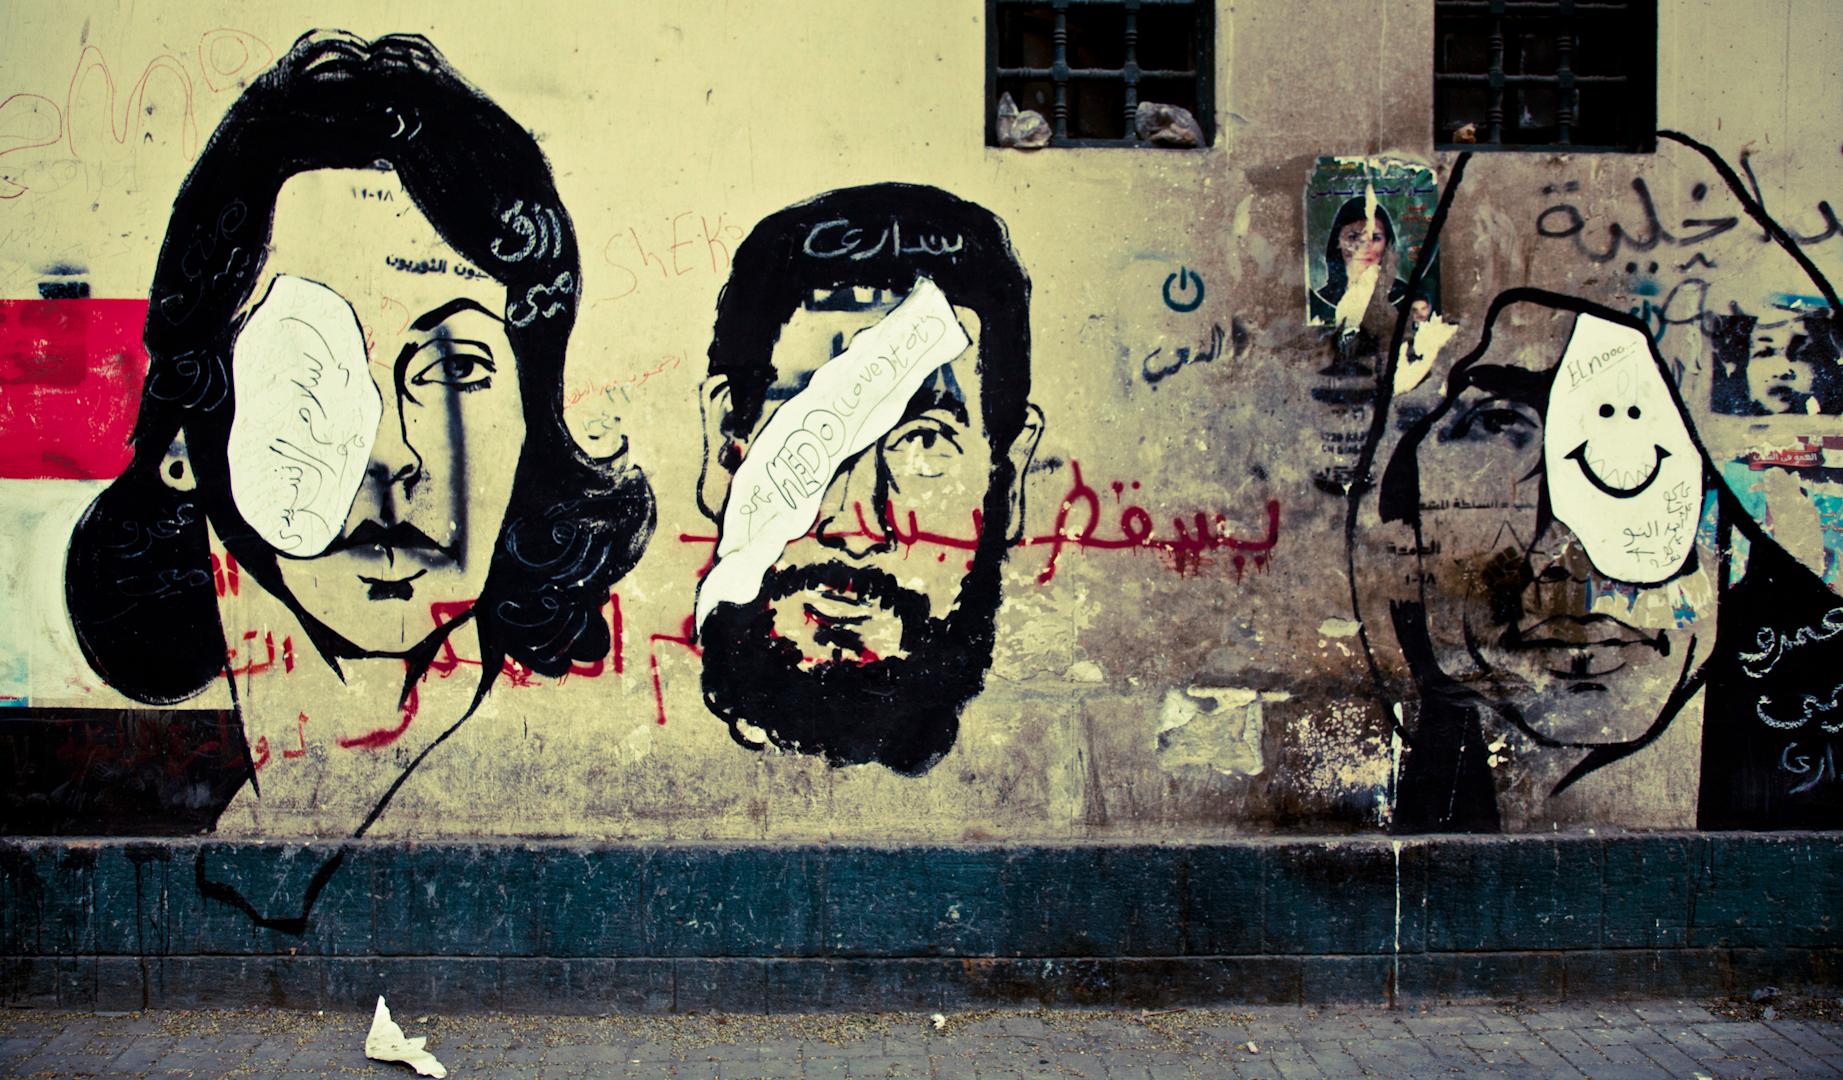 Work by graffiti artist Abo Bakr on a street near Tahrir Square in Cairo as seen in Jehane Noujaim’s documentary, 'The Square.'